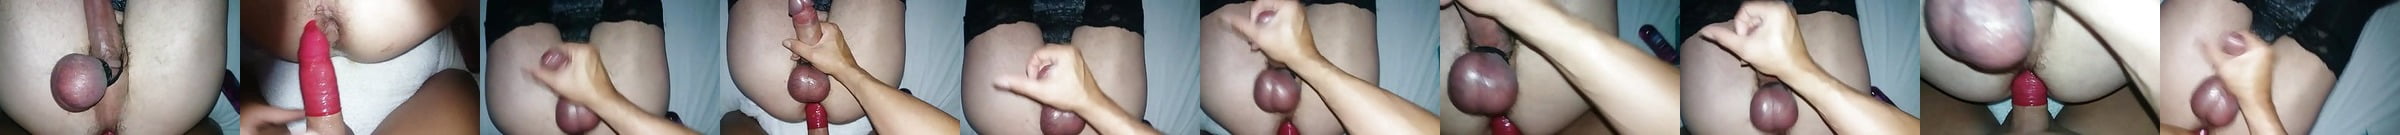 Amateur Shemale Porn Videos New Page 72